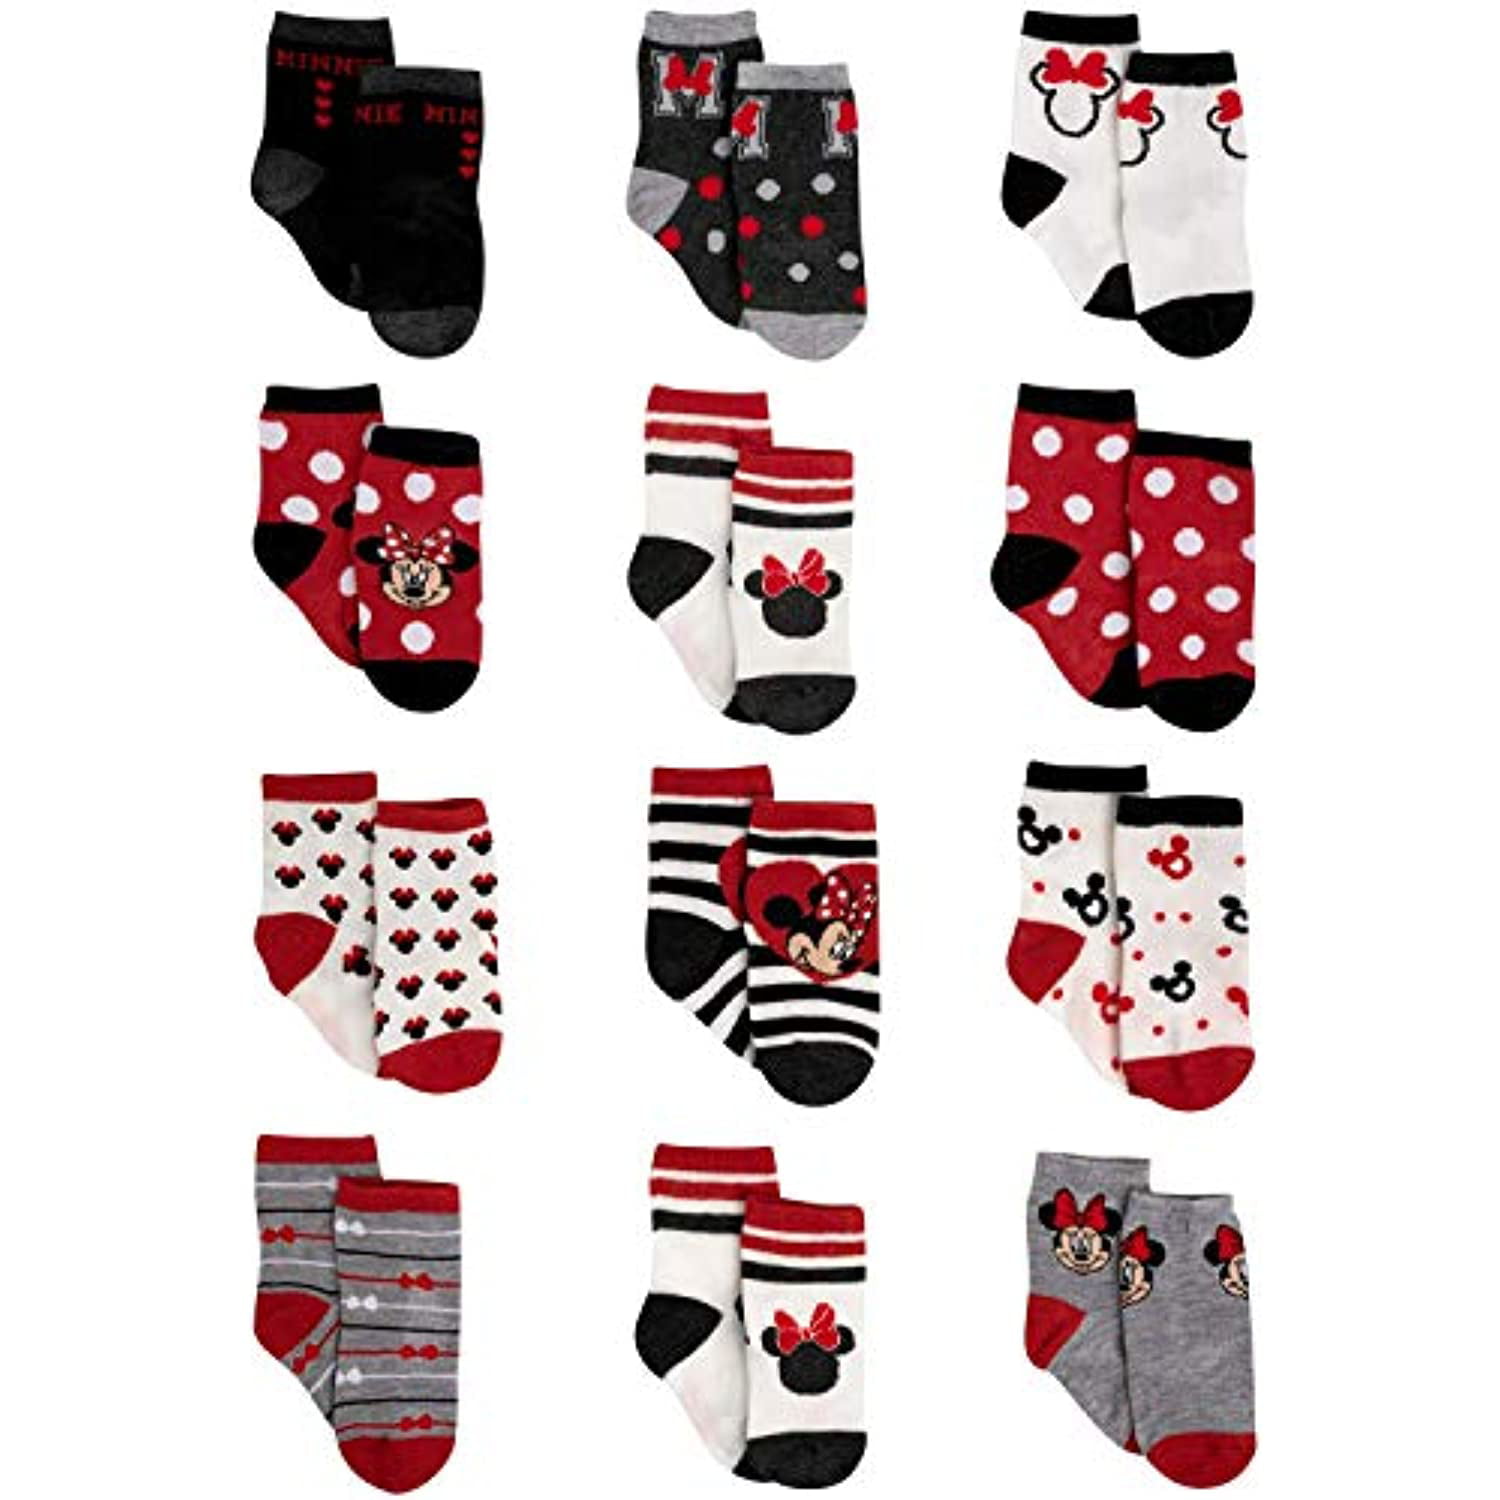 Infant/Toddler Girls 2 Pack Minnie Mouse Sock Set  Sizes 0-6 & 12-24 Mos   NWT! 